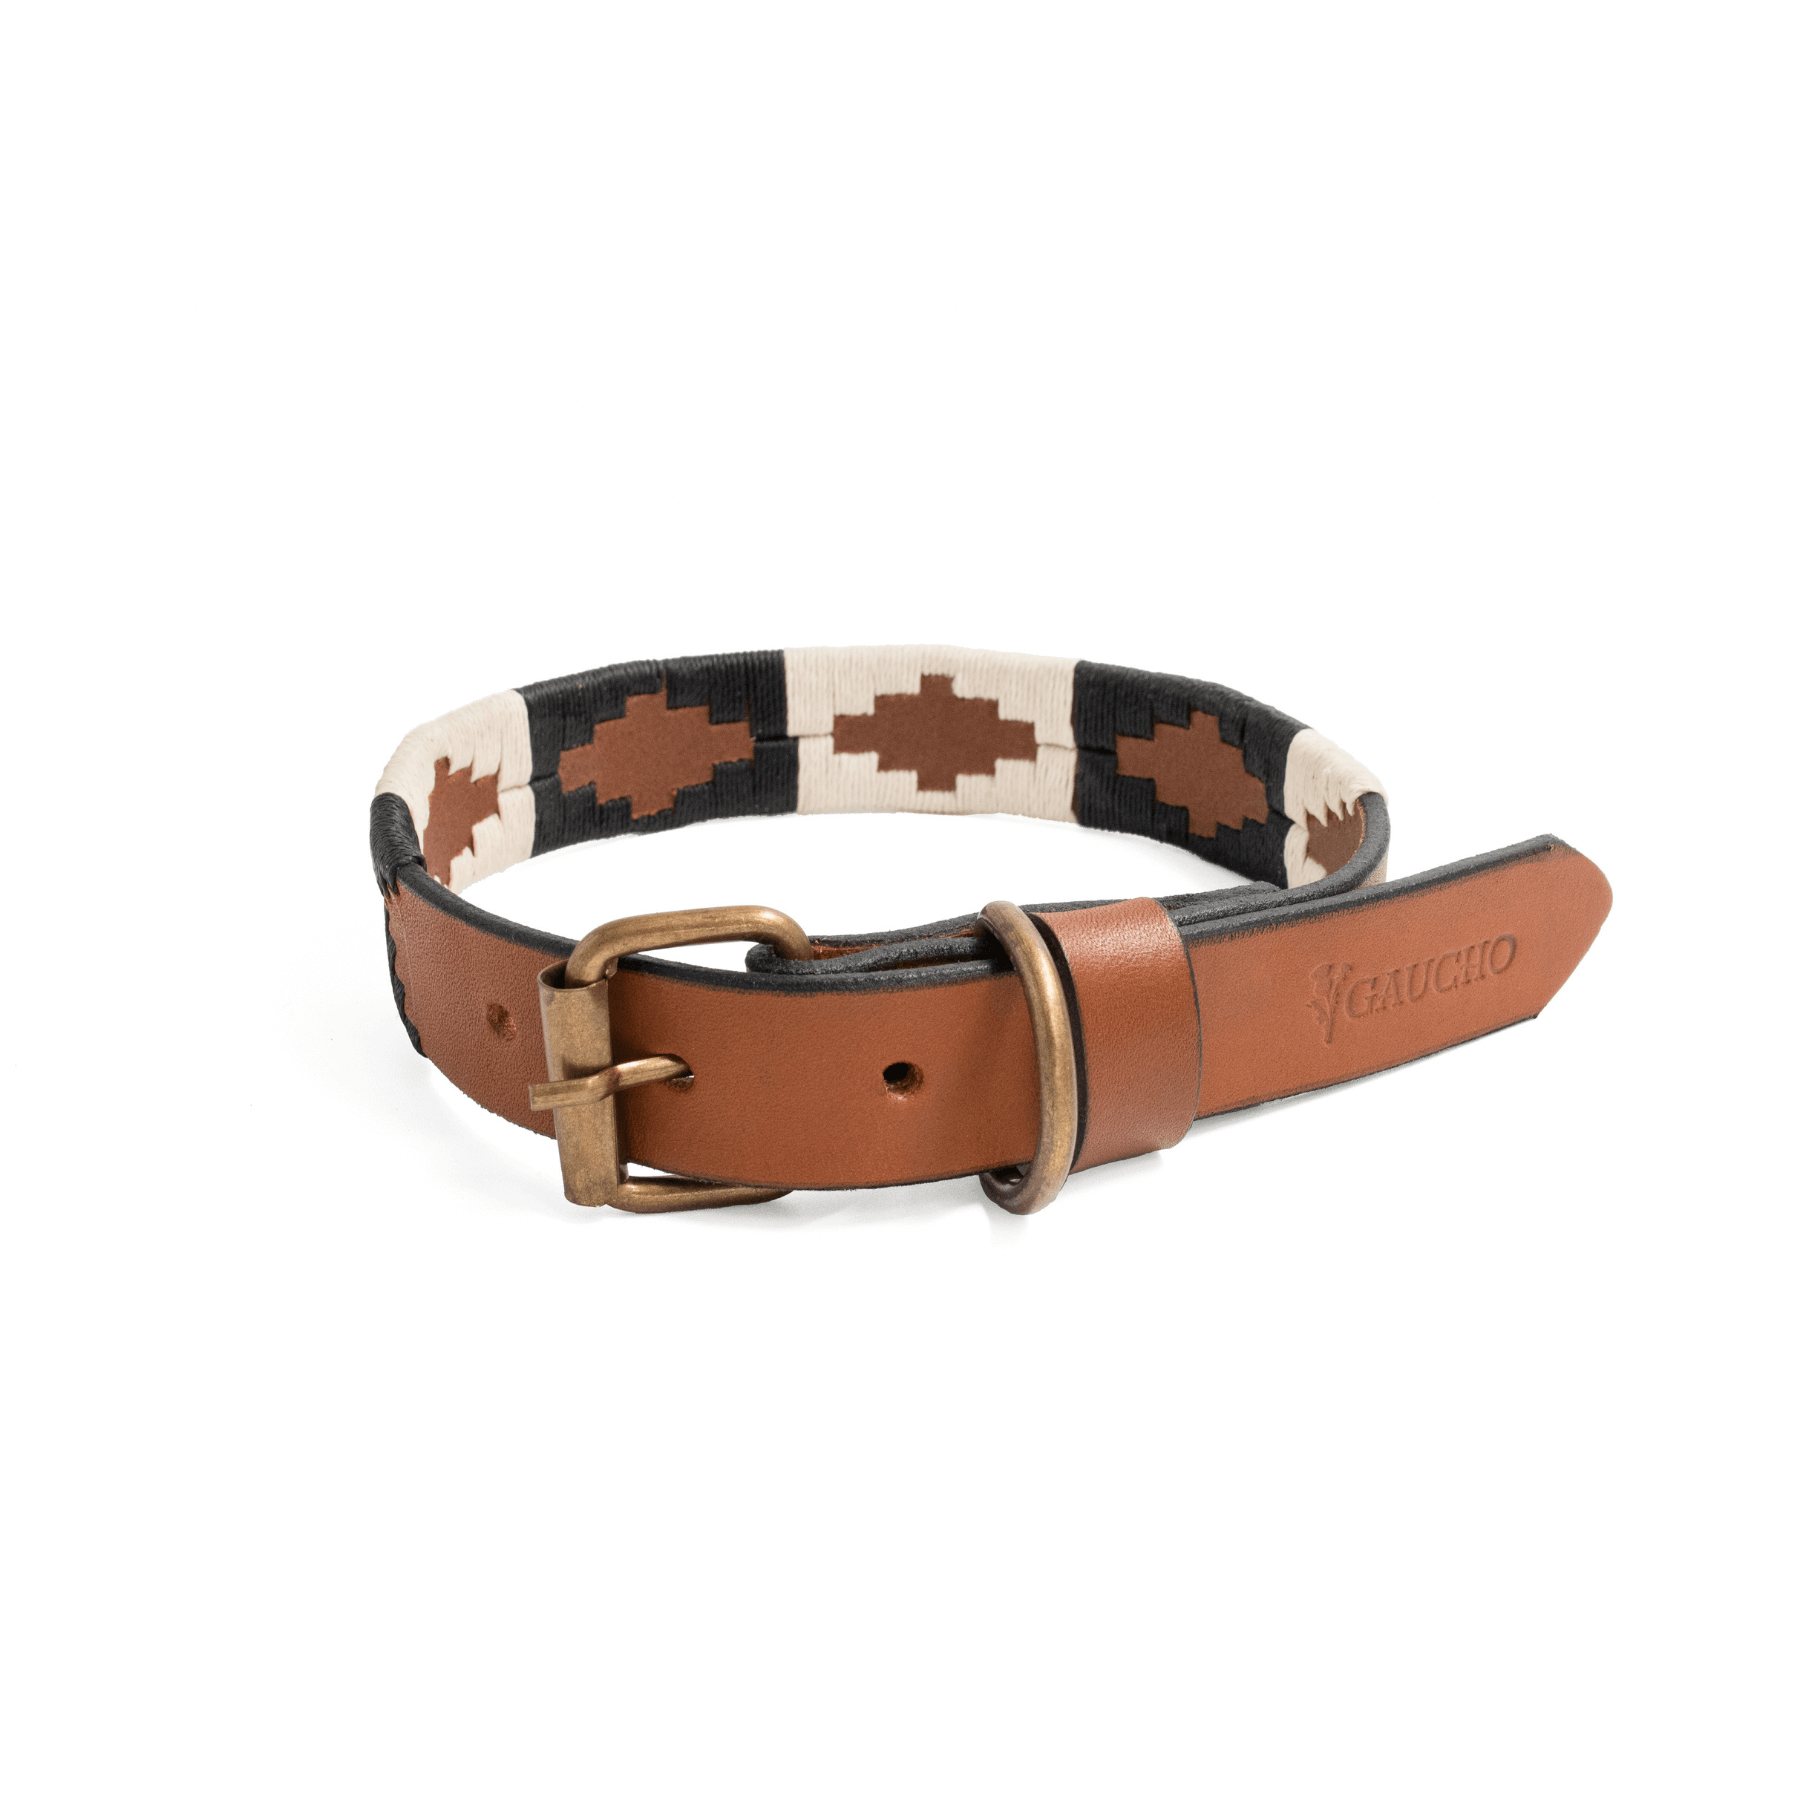 Gaucholife Dogs Embroidered Leather Dog Collar (Black/White)